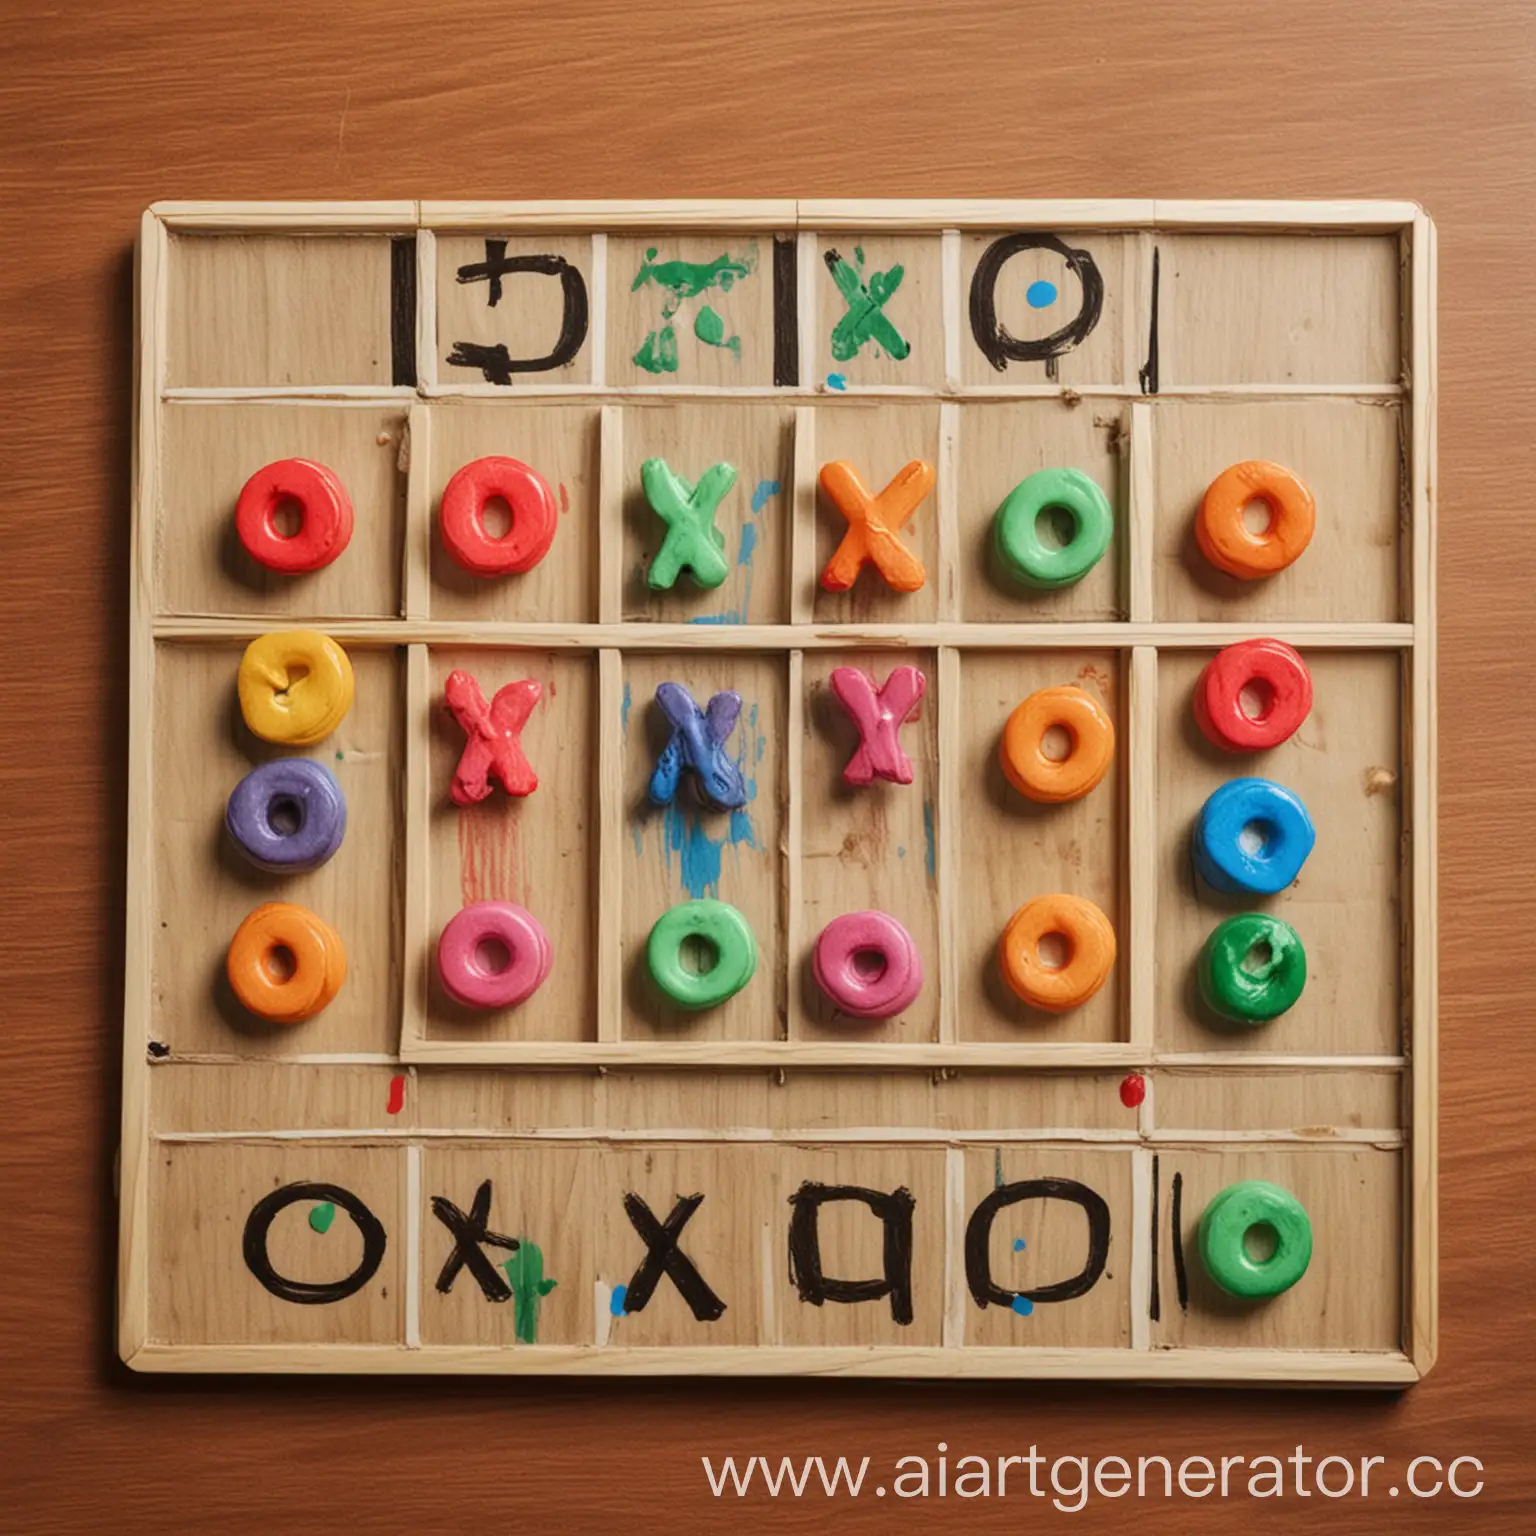 Colorful-TicTacToe-Game-Board-with-X-and-O-Symbols-in-Attractive-Palette